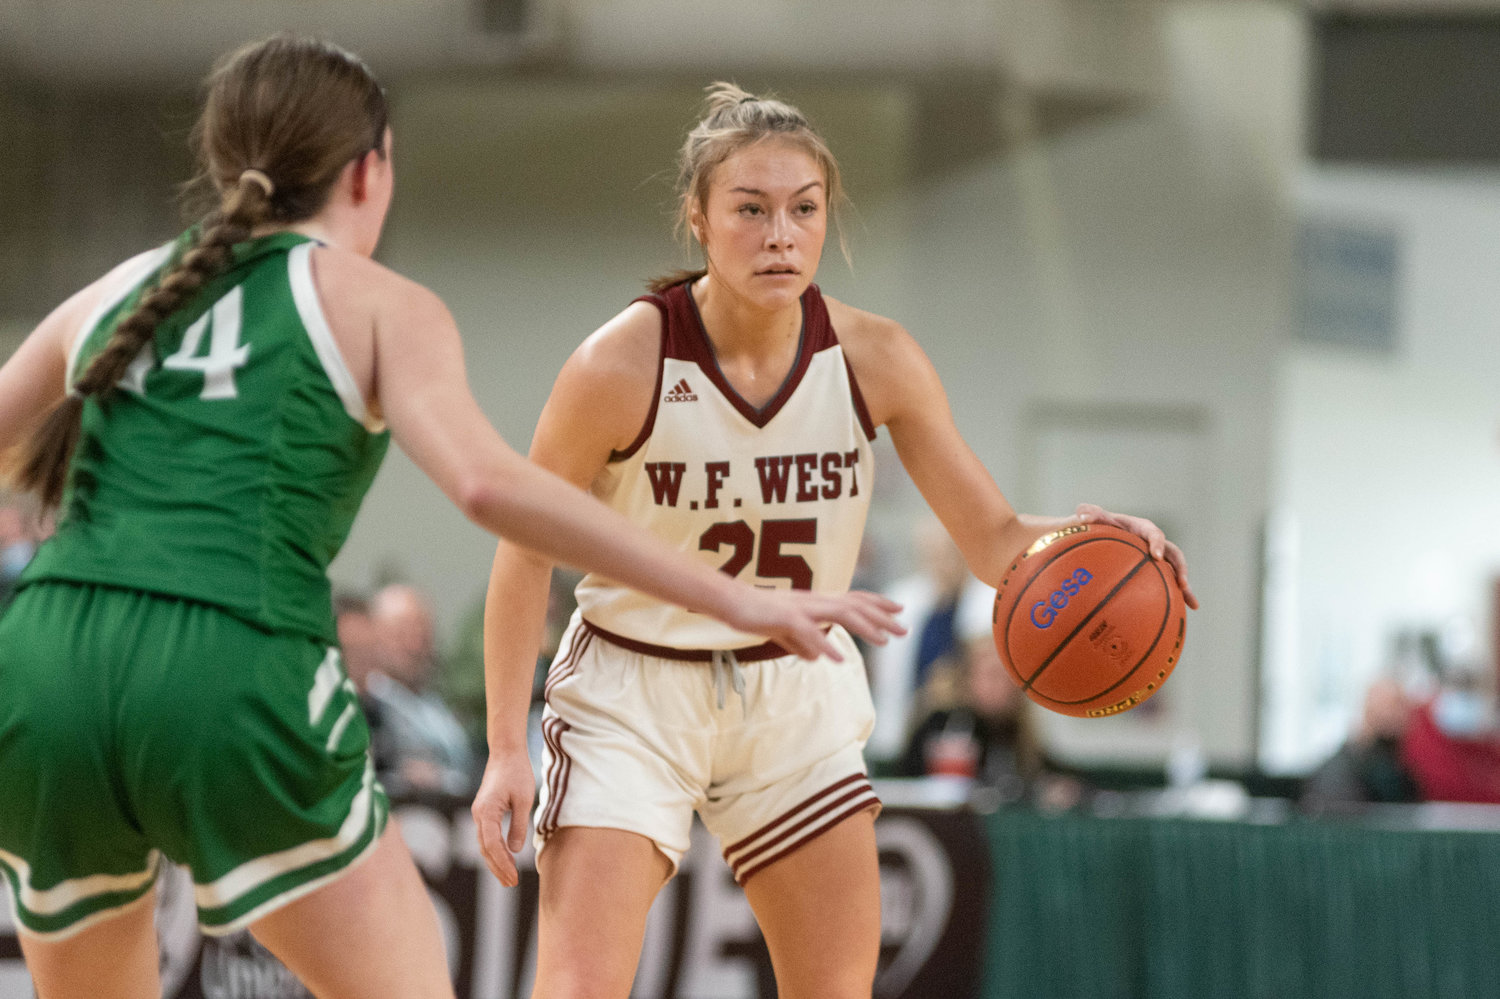 W.F. West guard Kyla McCallum scans the defense against Lynden in the 2A State Tournament at the Yakima Valley SunDome March 2.